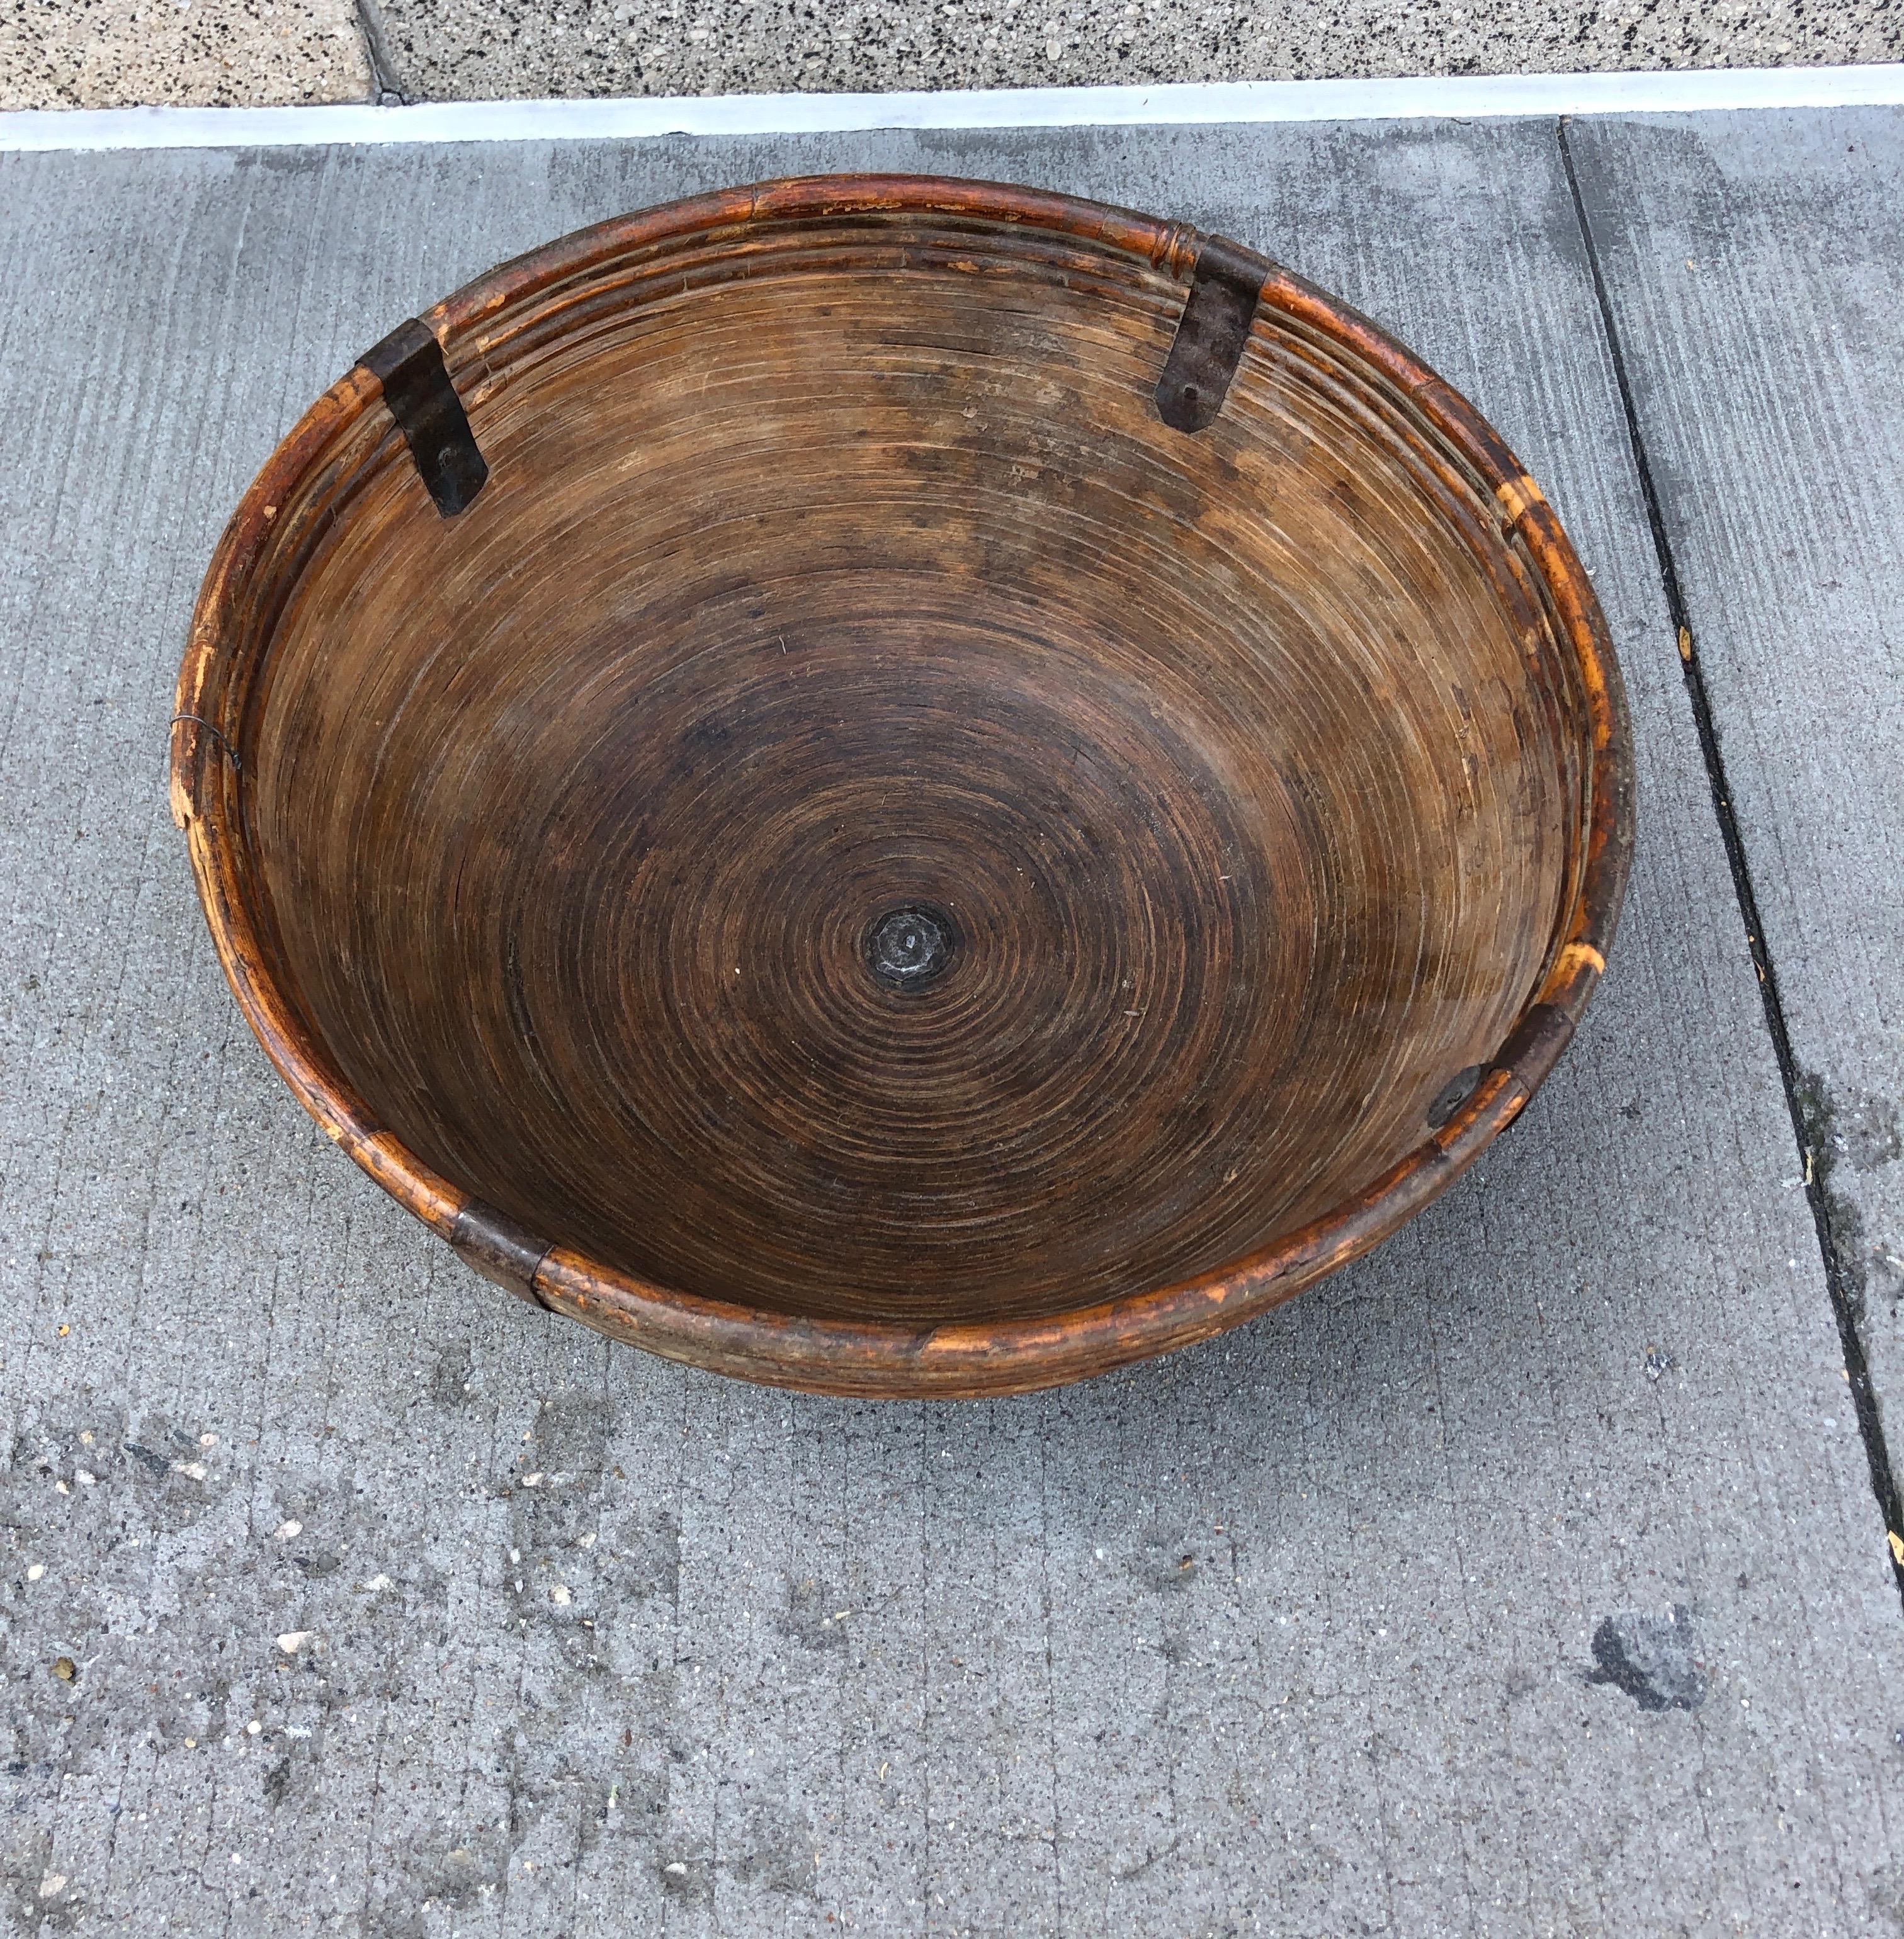 Fiber/Wood Bowl with Metal Supports 7